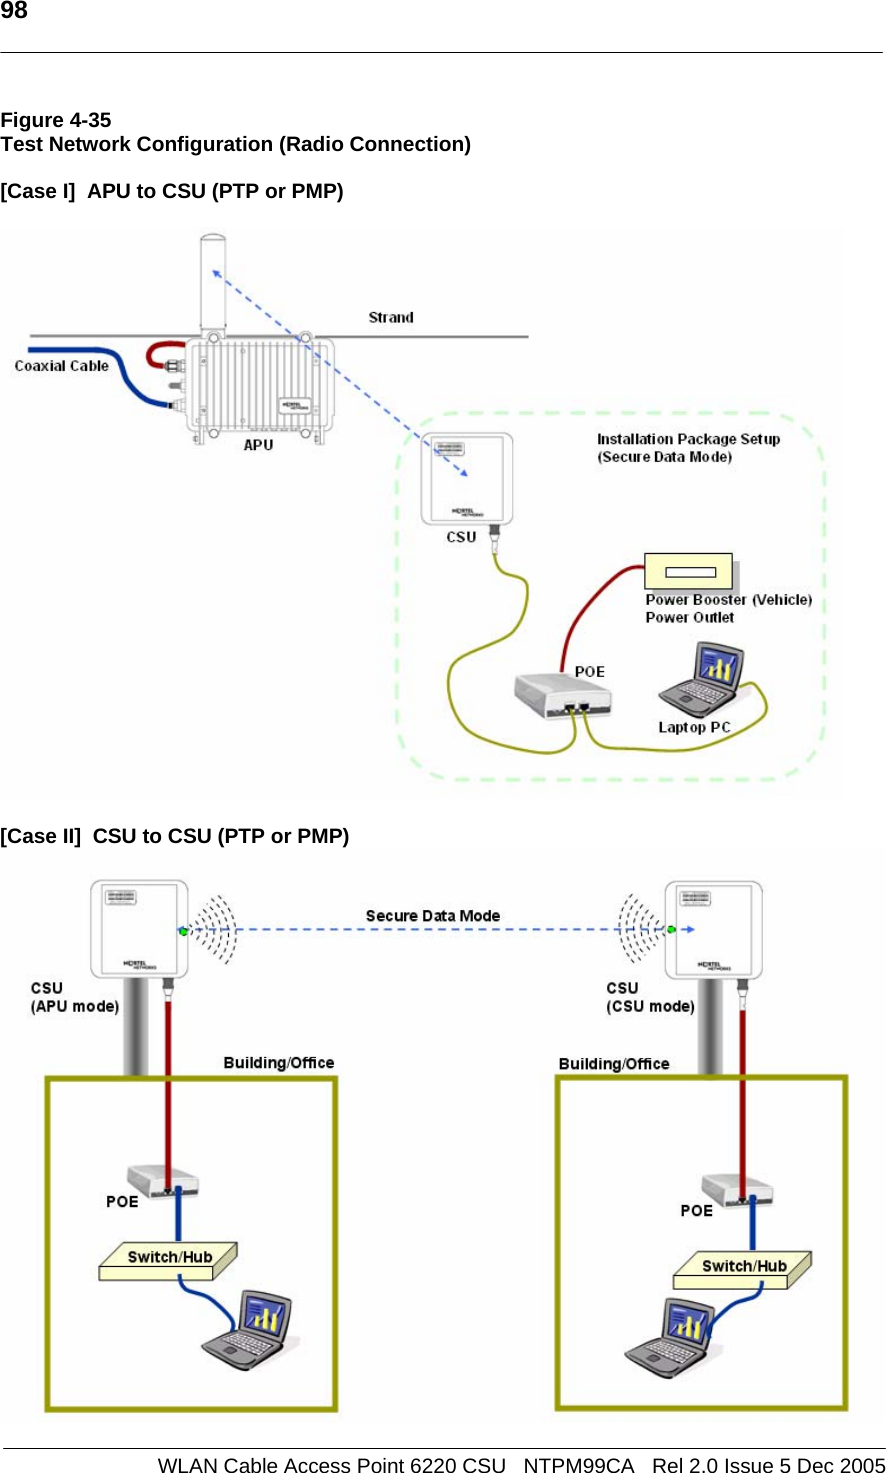   98  WLAN Cable Access Point 6220 CSU   NTPM99CA   Rel 2.0 Issue 5 Dec 2005 Figure 4-35 Test Network Configuration (Radio Connection)  [Case I]  APU to CSU (PTP or PMP)    [Case II]  CSU to CSU (PTP or PMP)  